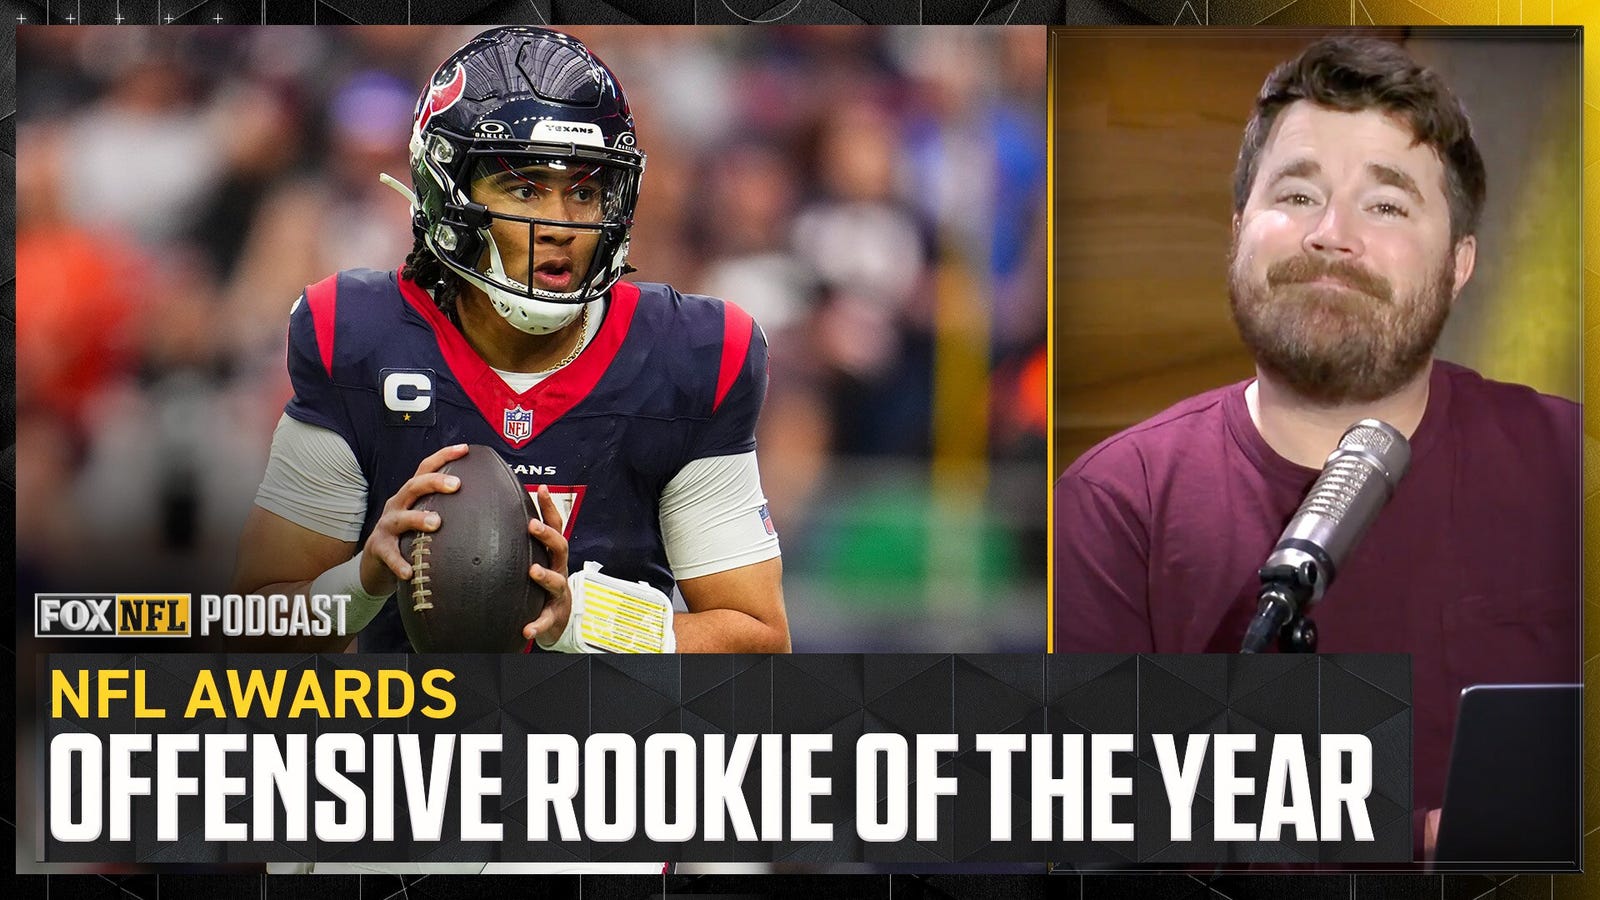 C.J. Stroud wins NFL on FOX Pod's Offensive Rookie of the Year